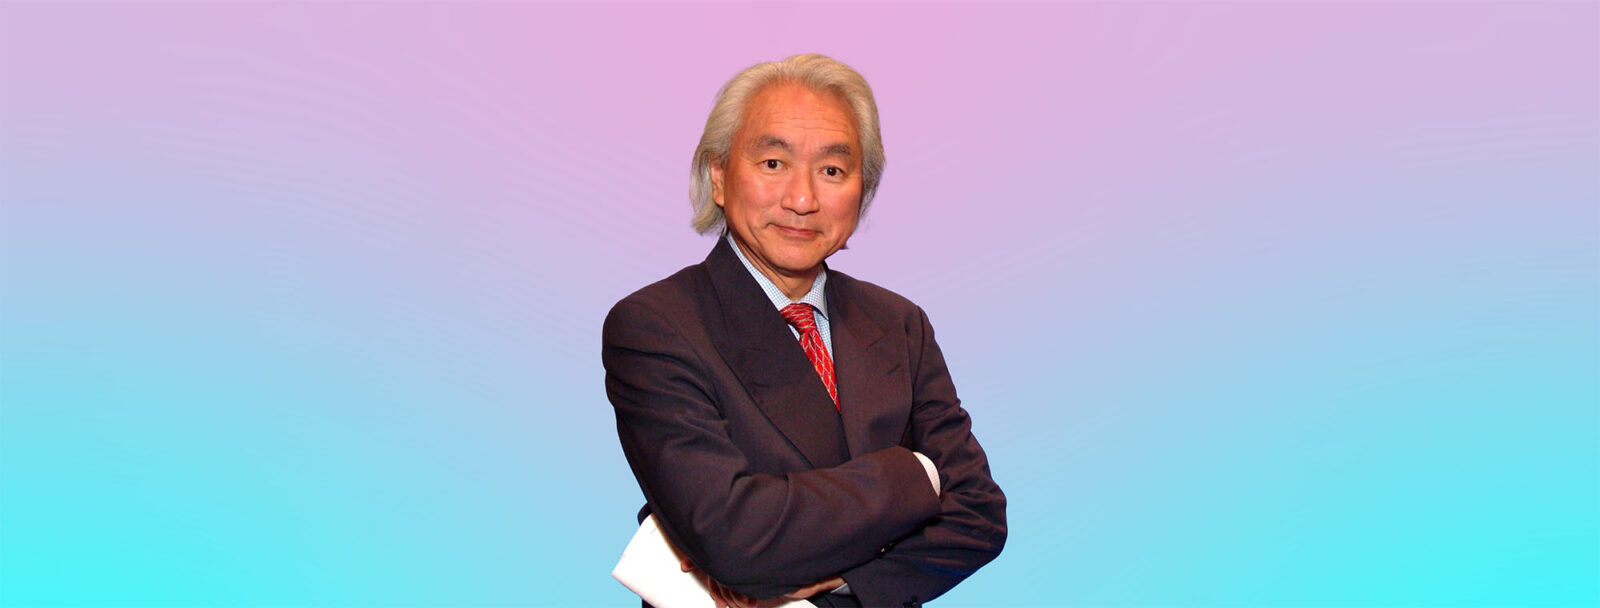 Michio Kaku, Asian white male with white hair, standing with his arms crossed holding what appears to be a bunch of papers